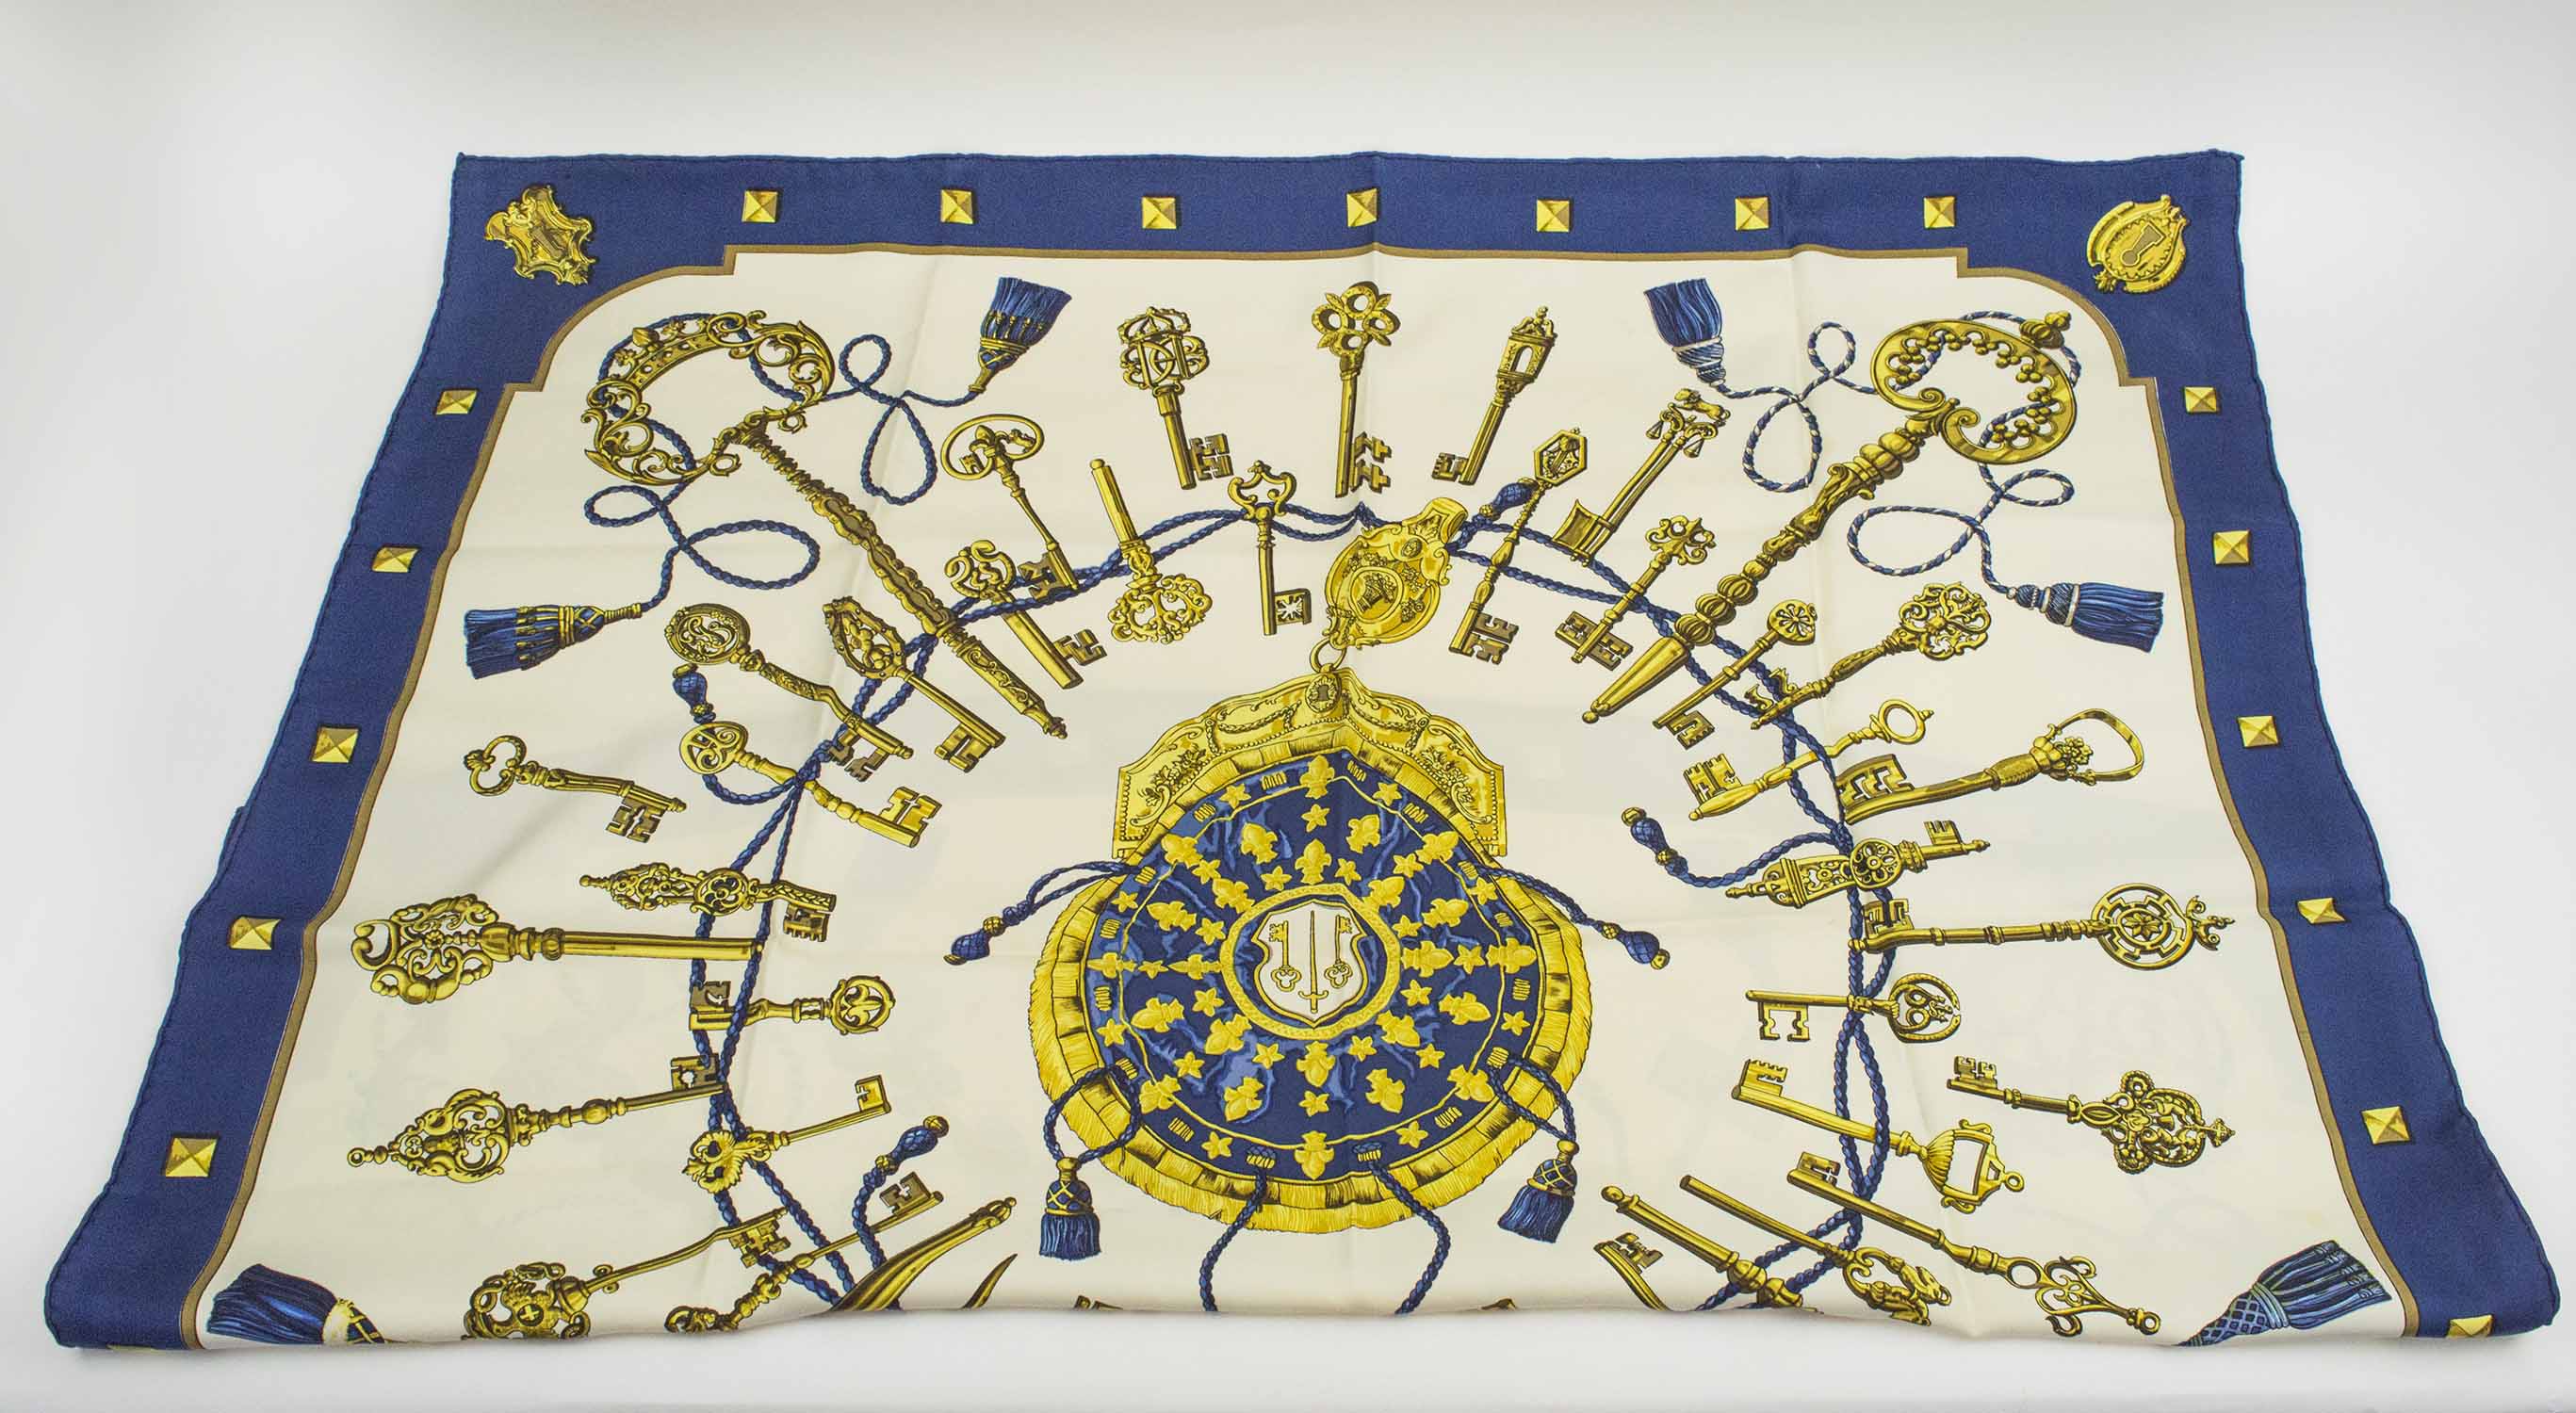 HERMÈS SCARF, 'Les clefs' of 'The keys', by Caty Latham, blue and gold,